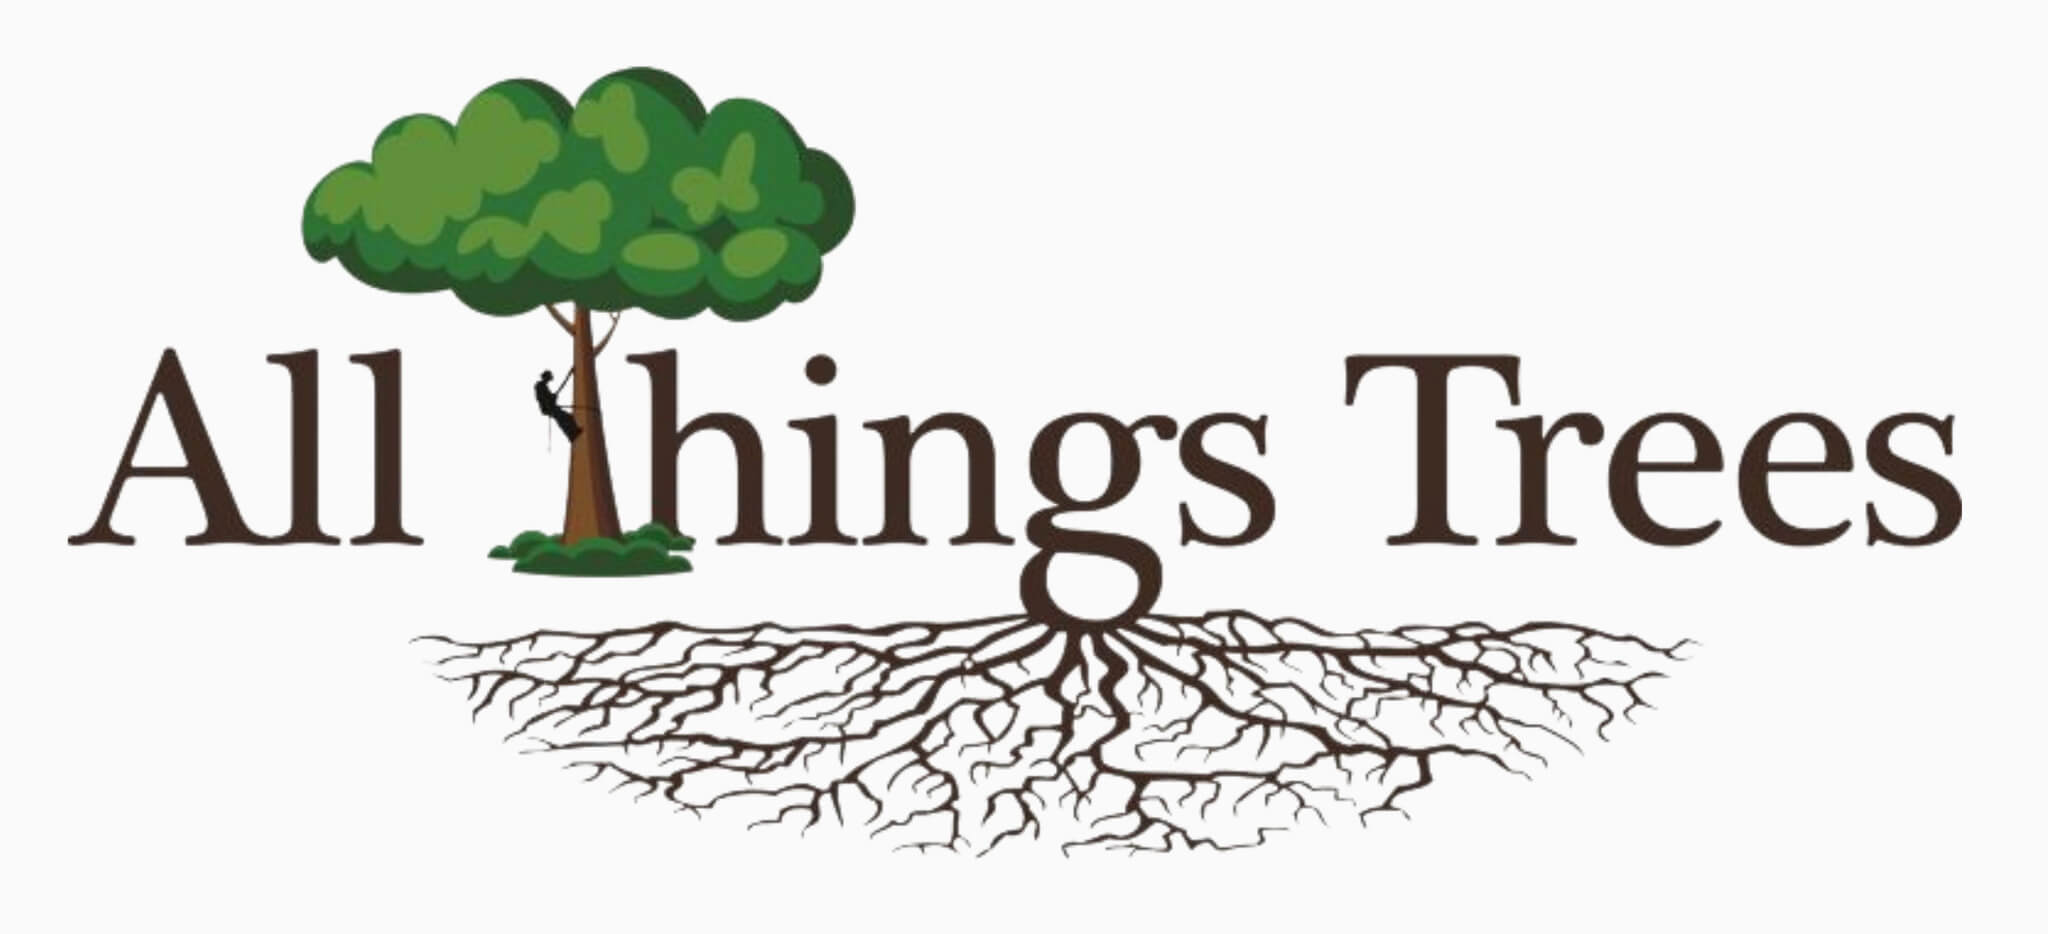 All Things Trees